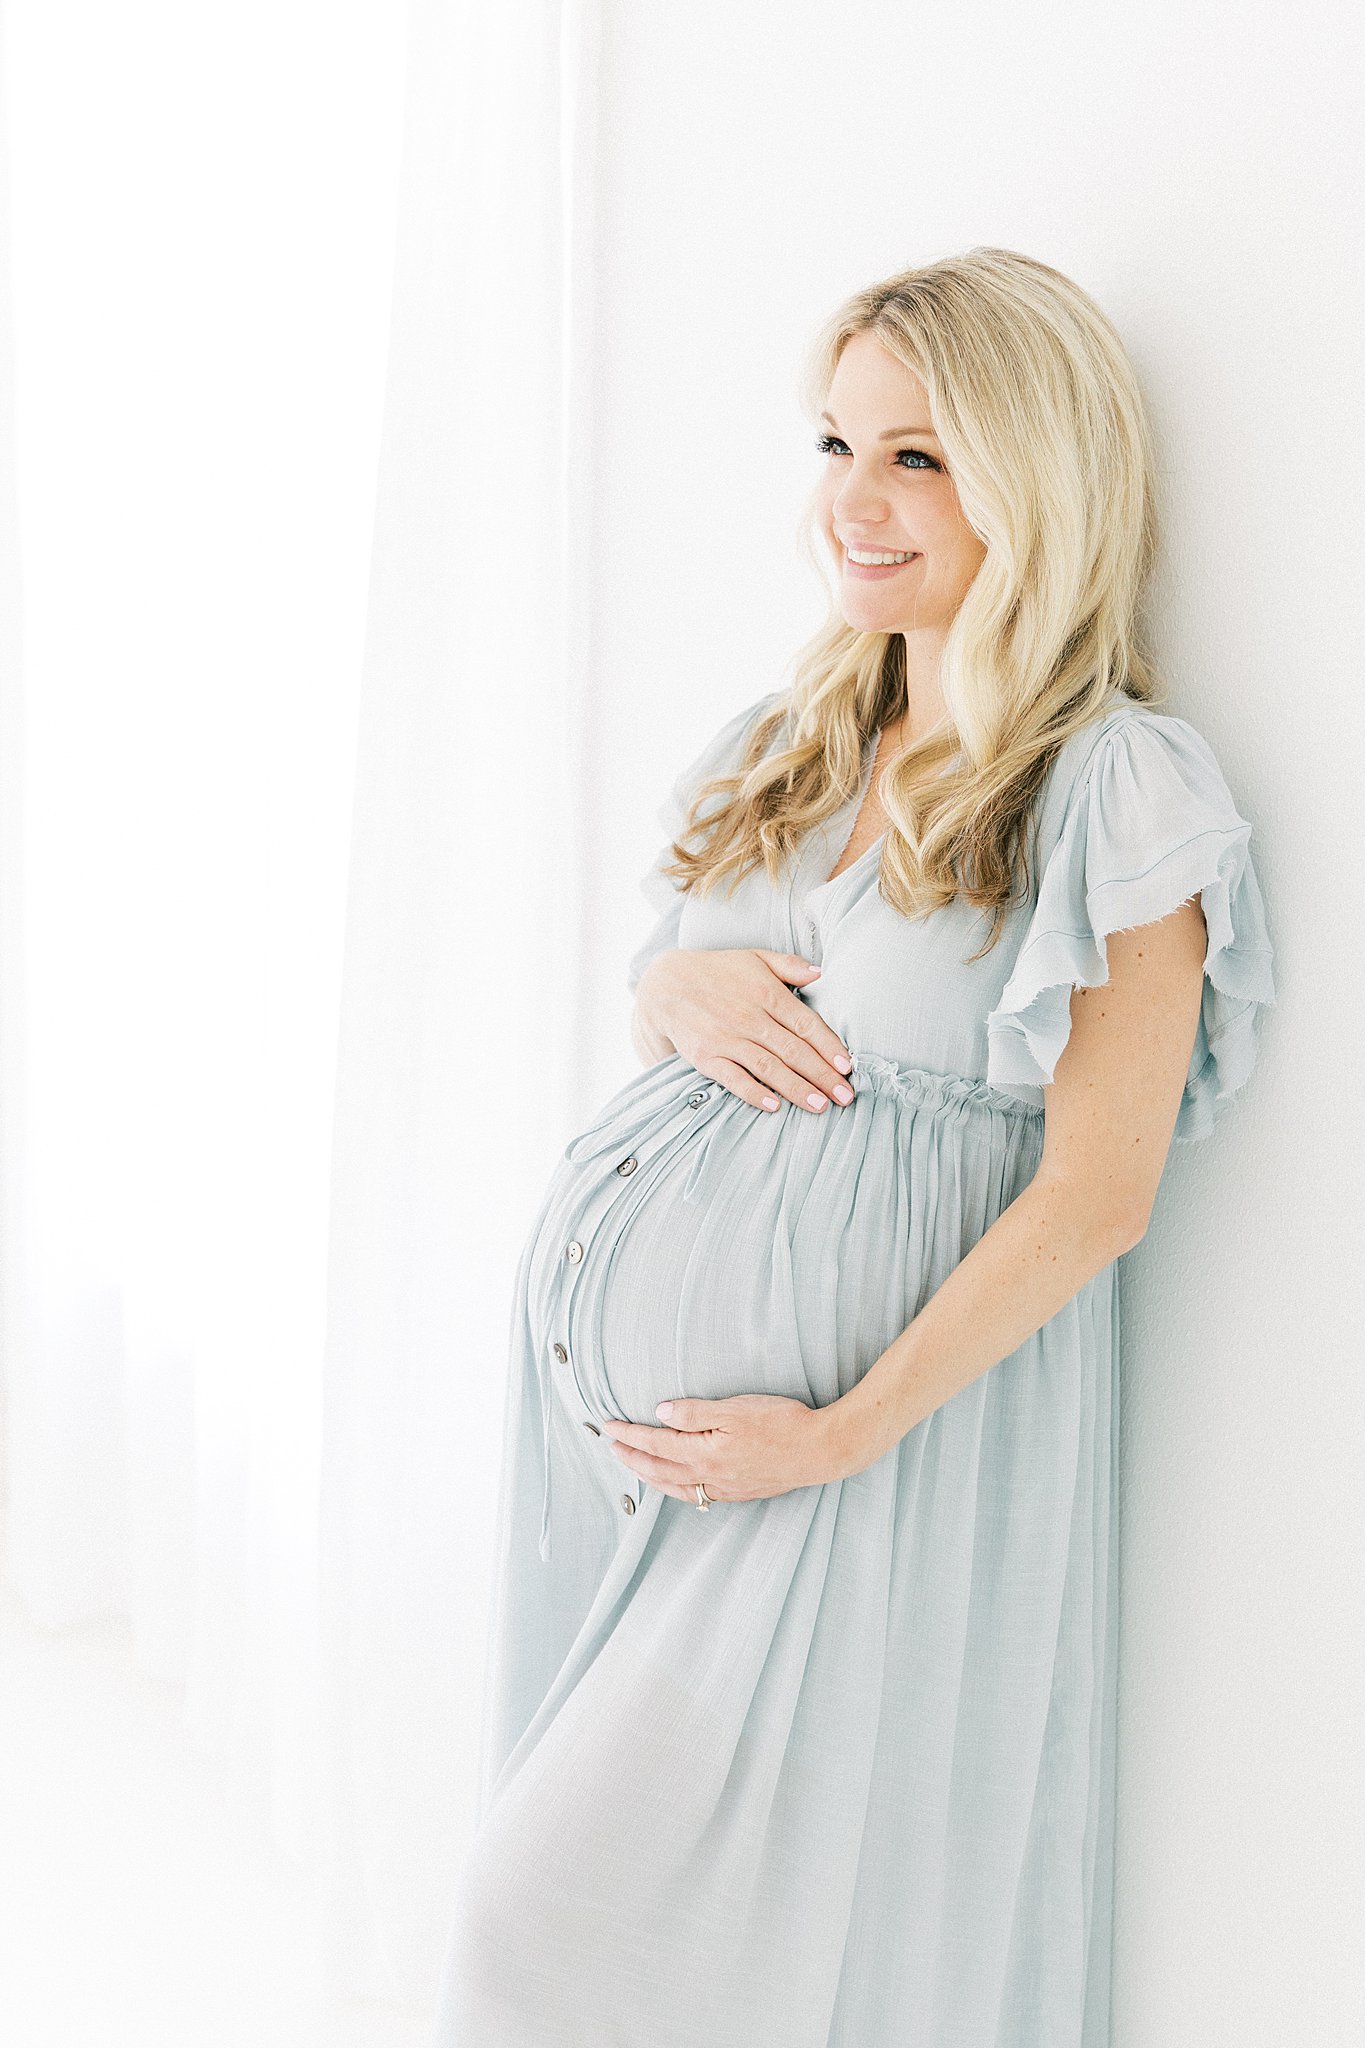 A mom to be leans against a wall smiling in a blue maternity dress holding her bump in a studio